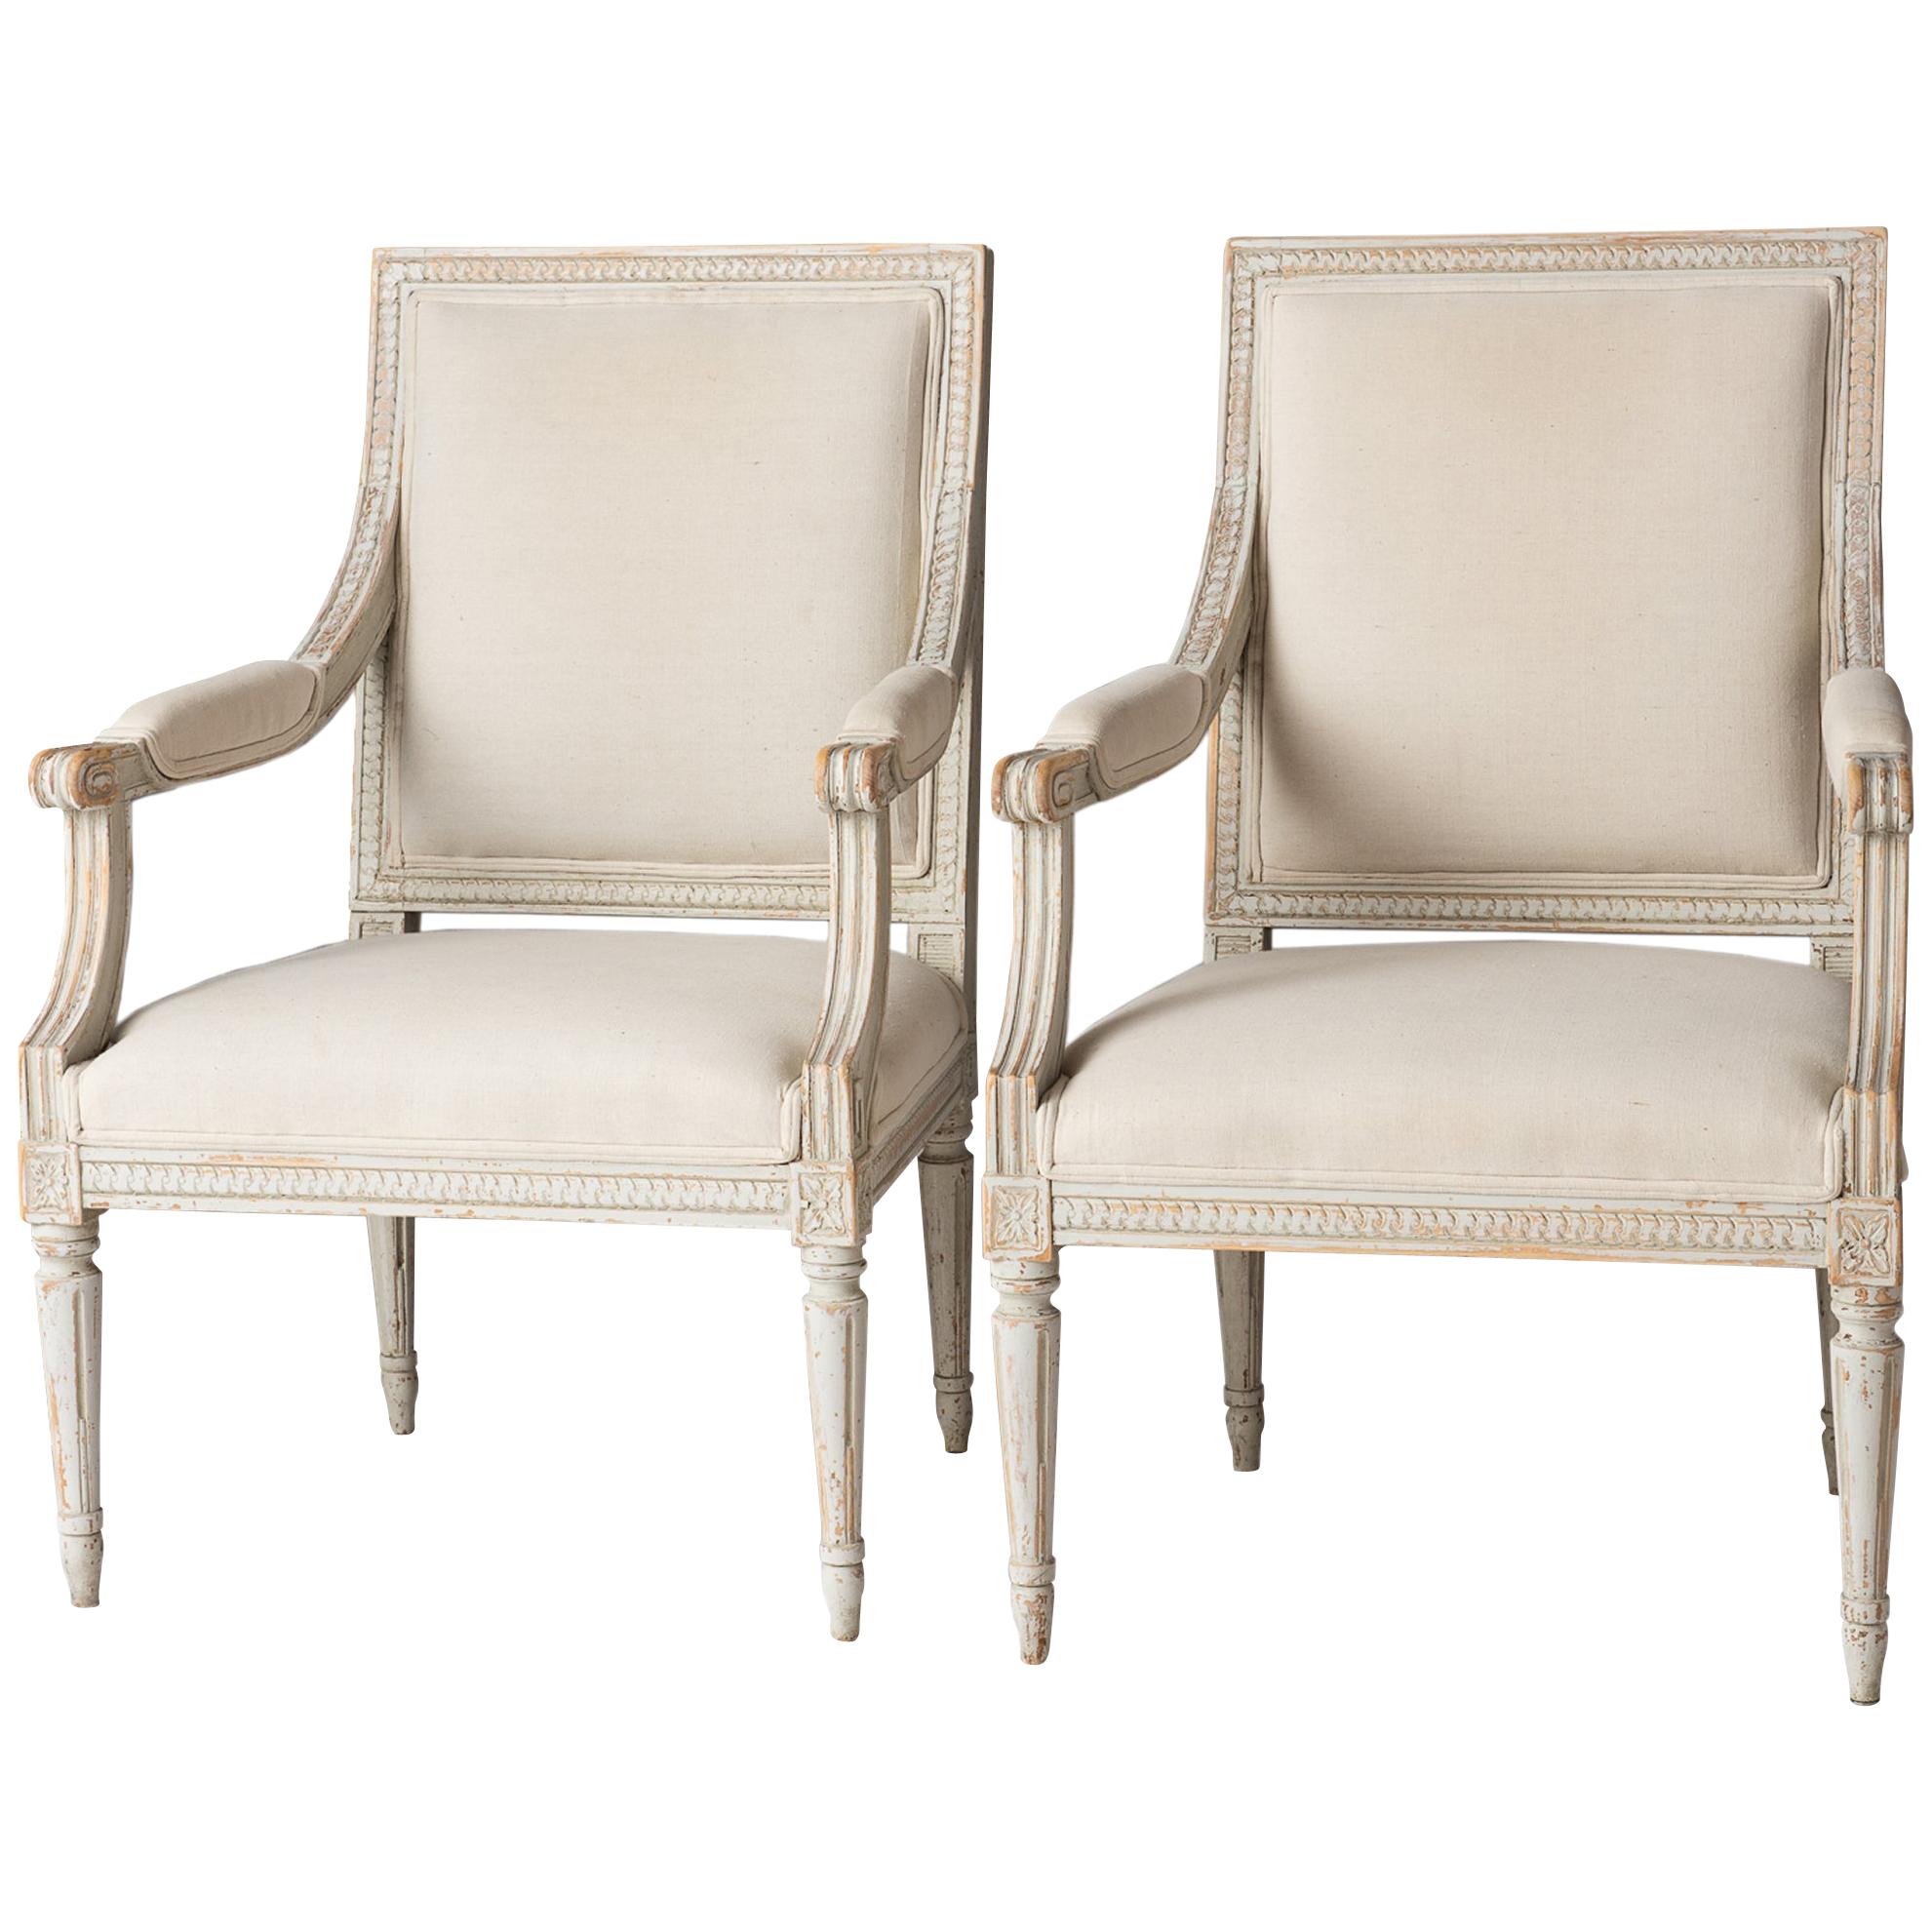 Pair of Swedish Late Gustavian Period Stockholm Armchairs, circa 1800 For Sale